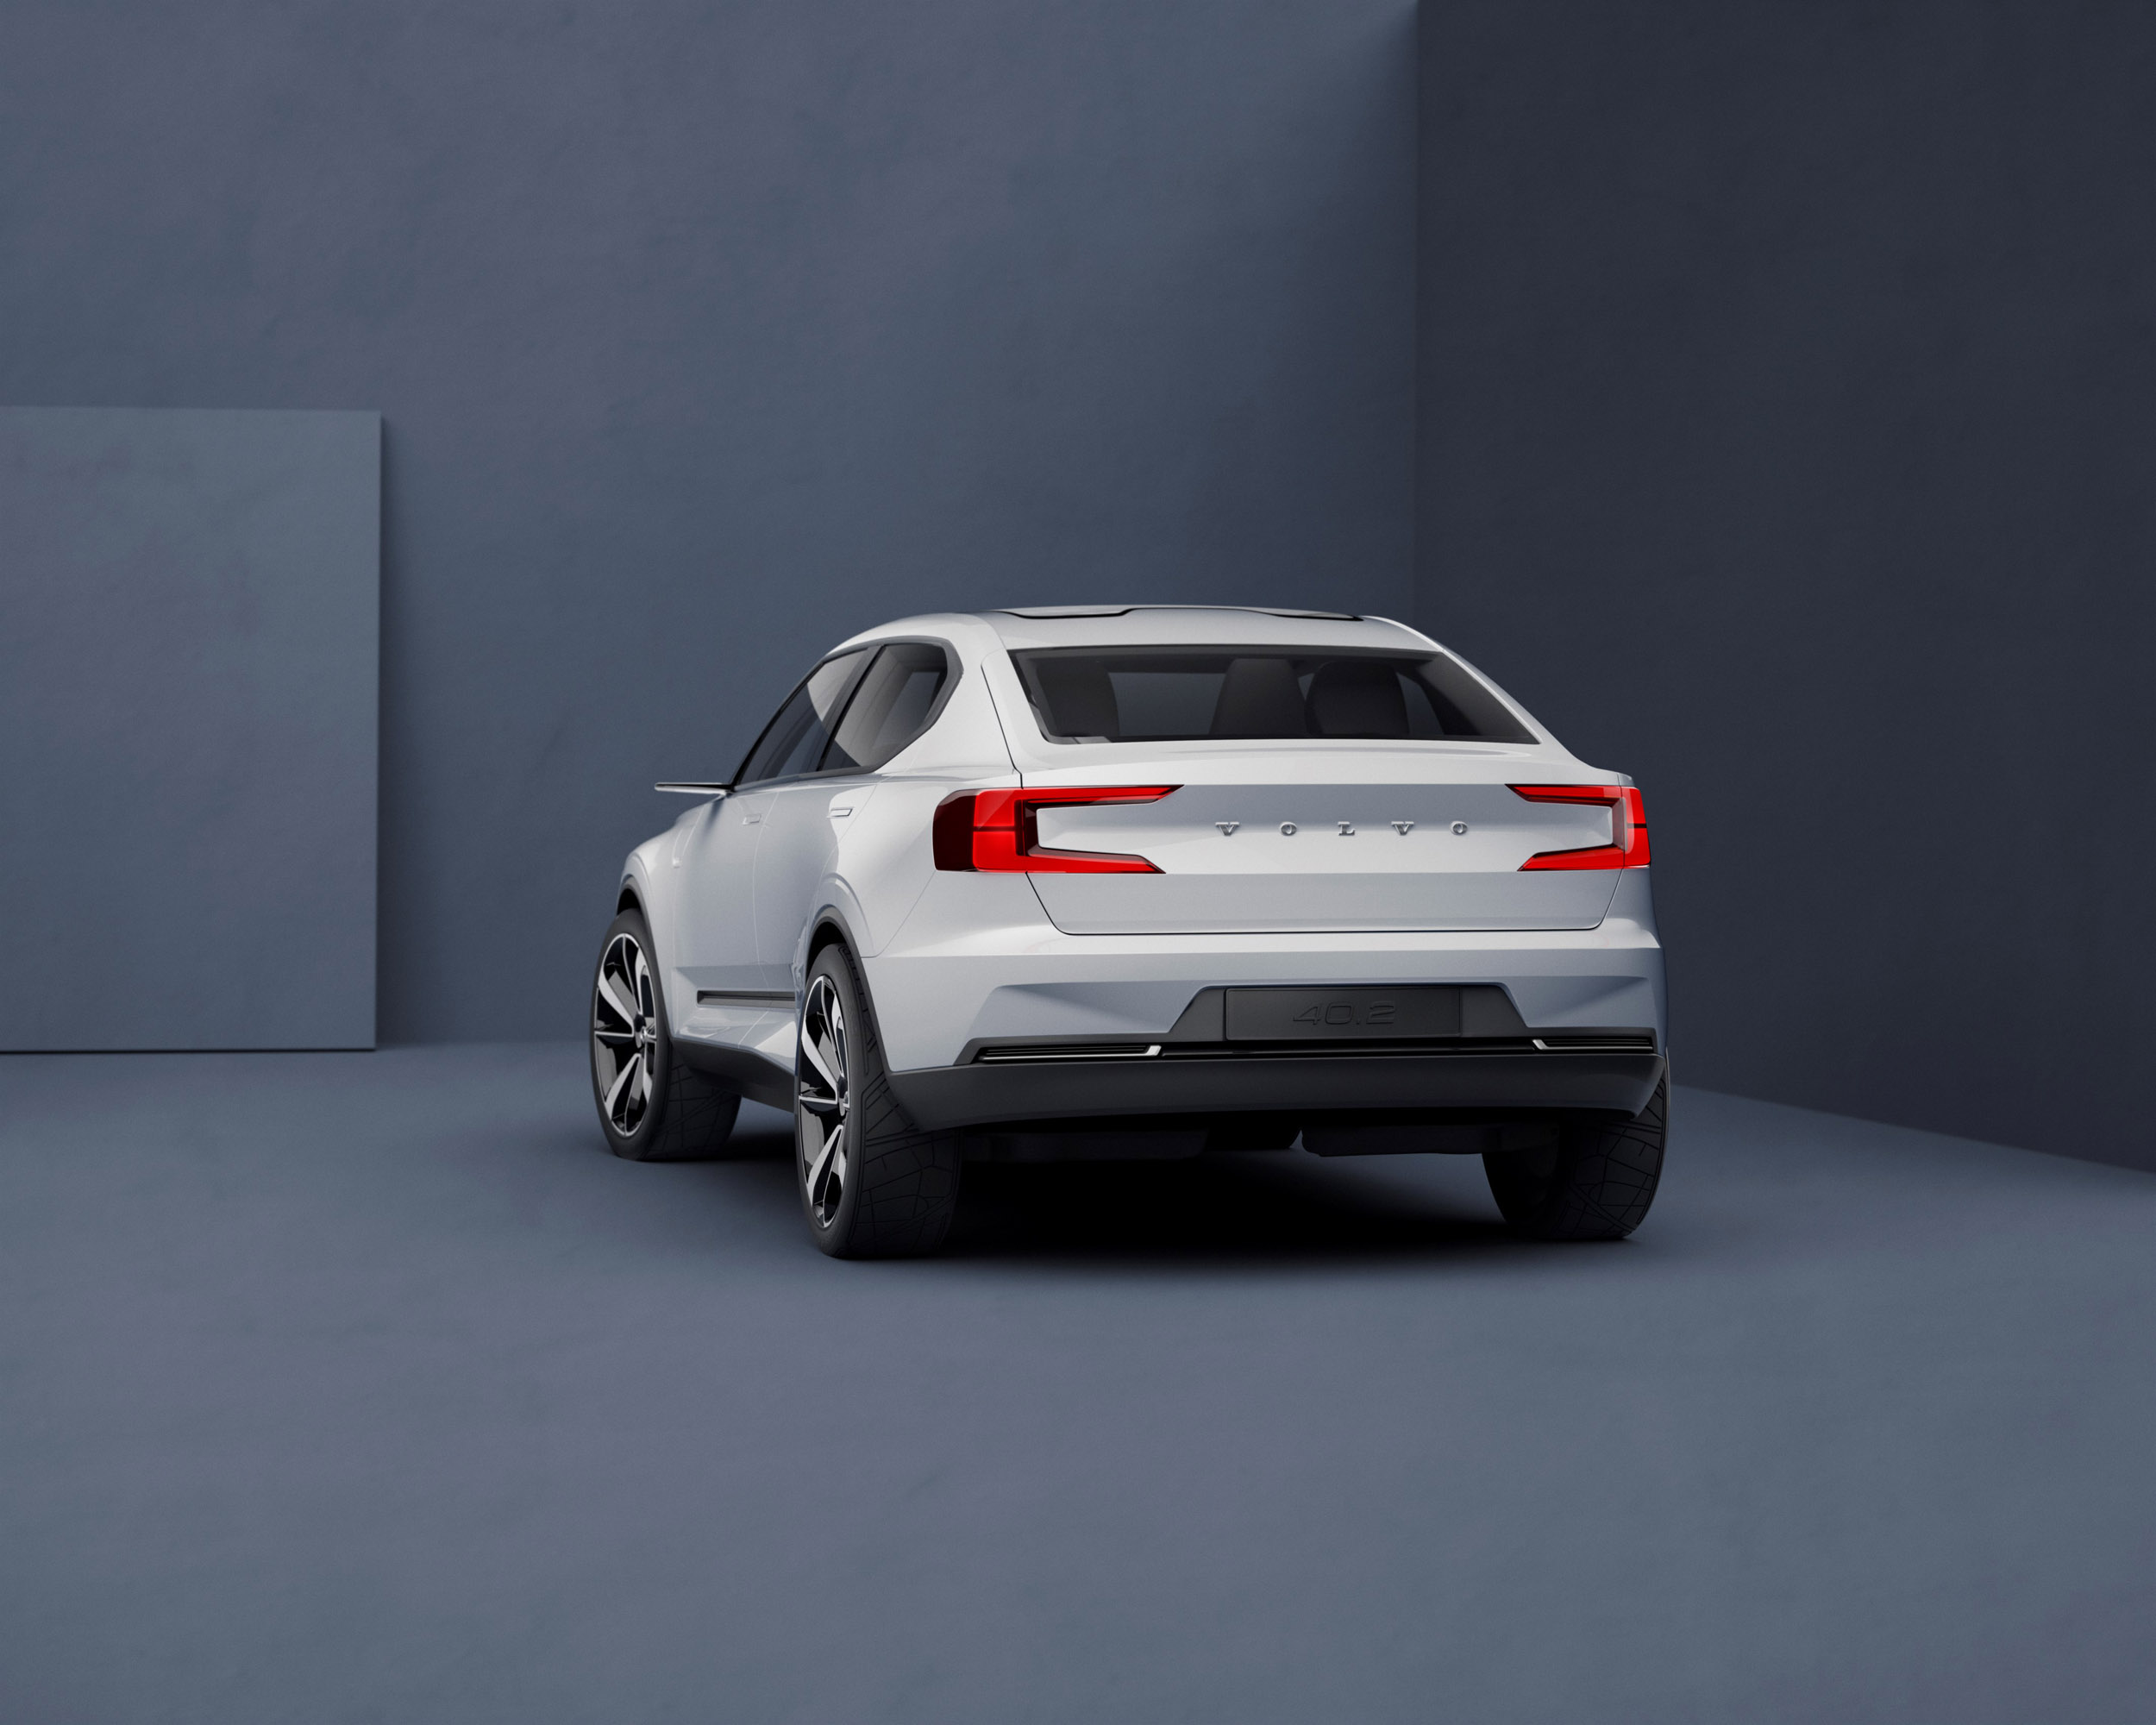 Volvo Concept Cars 40.1 and 40.2